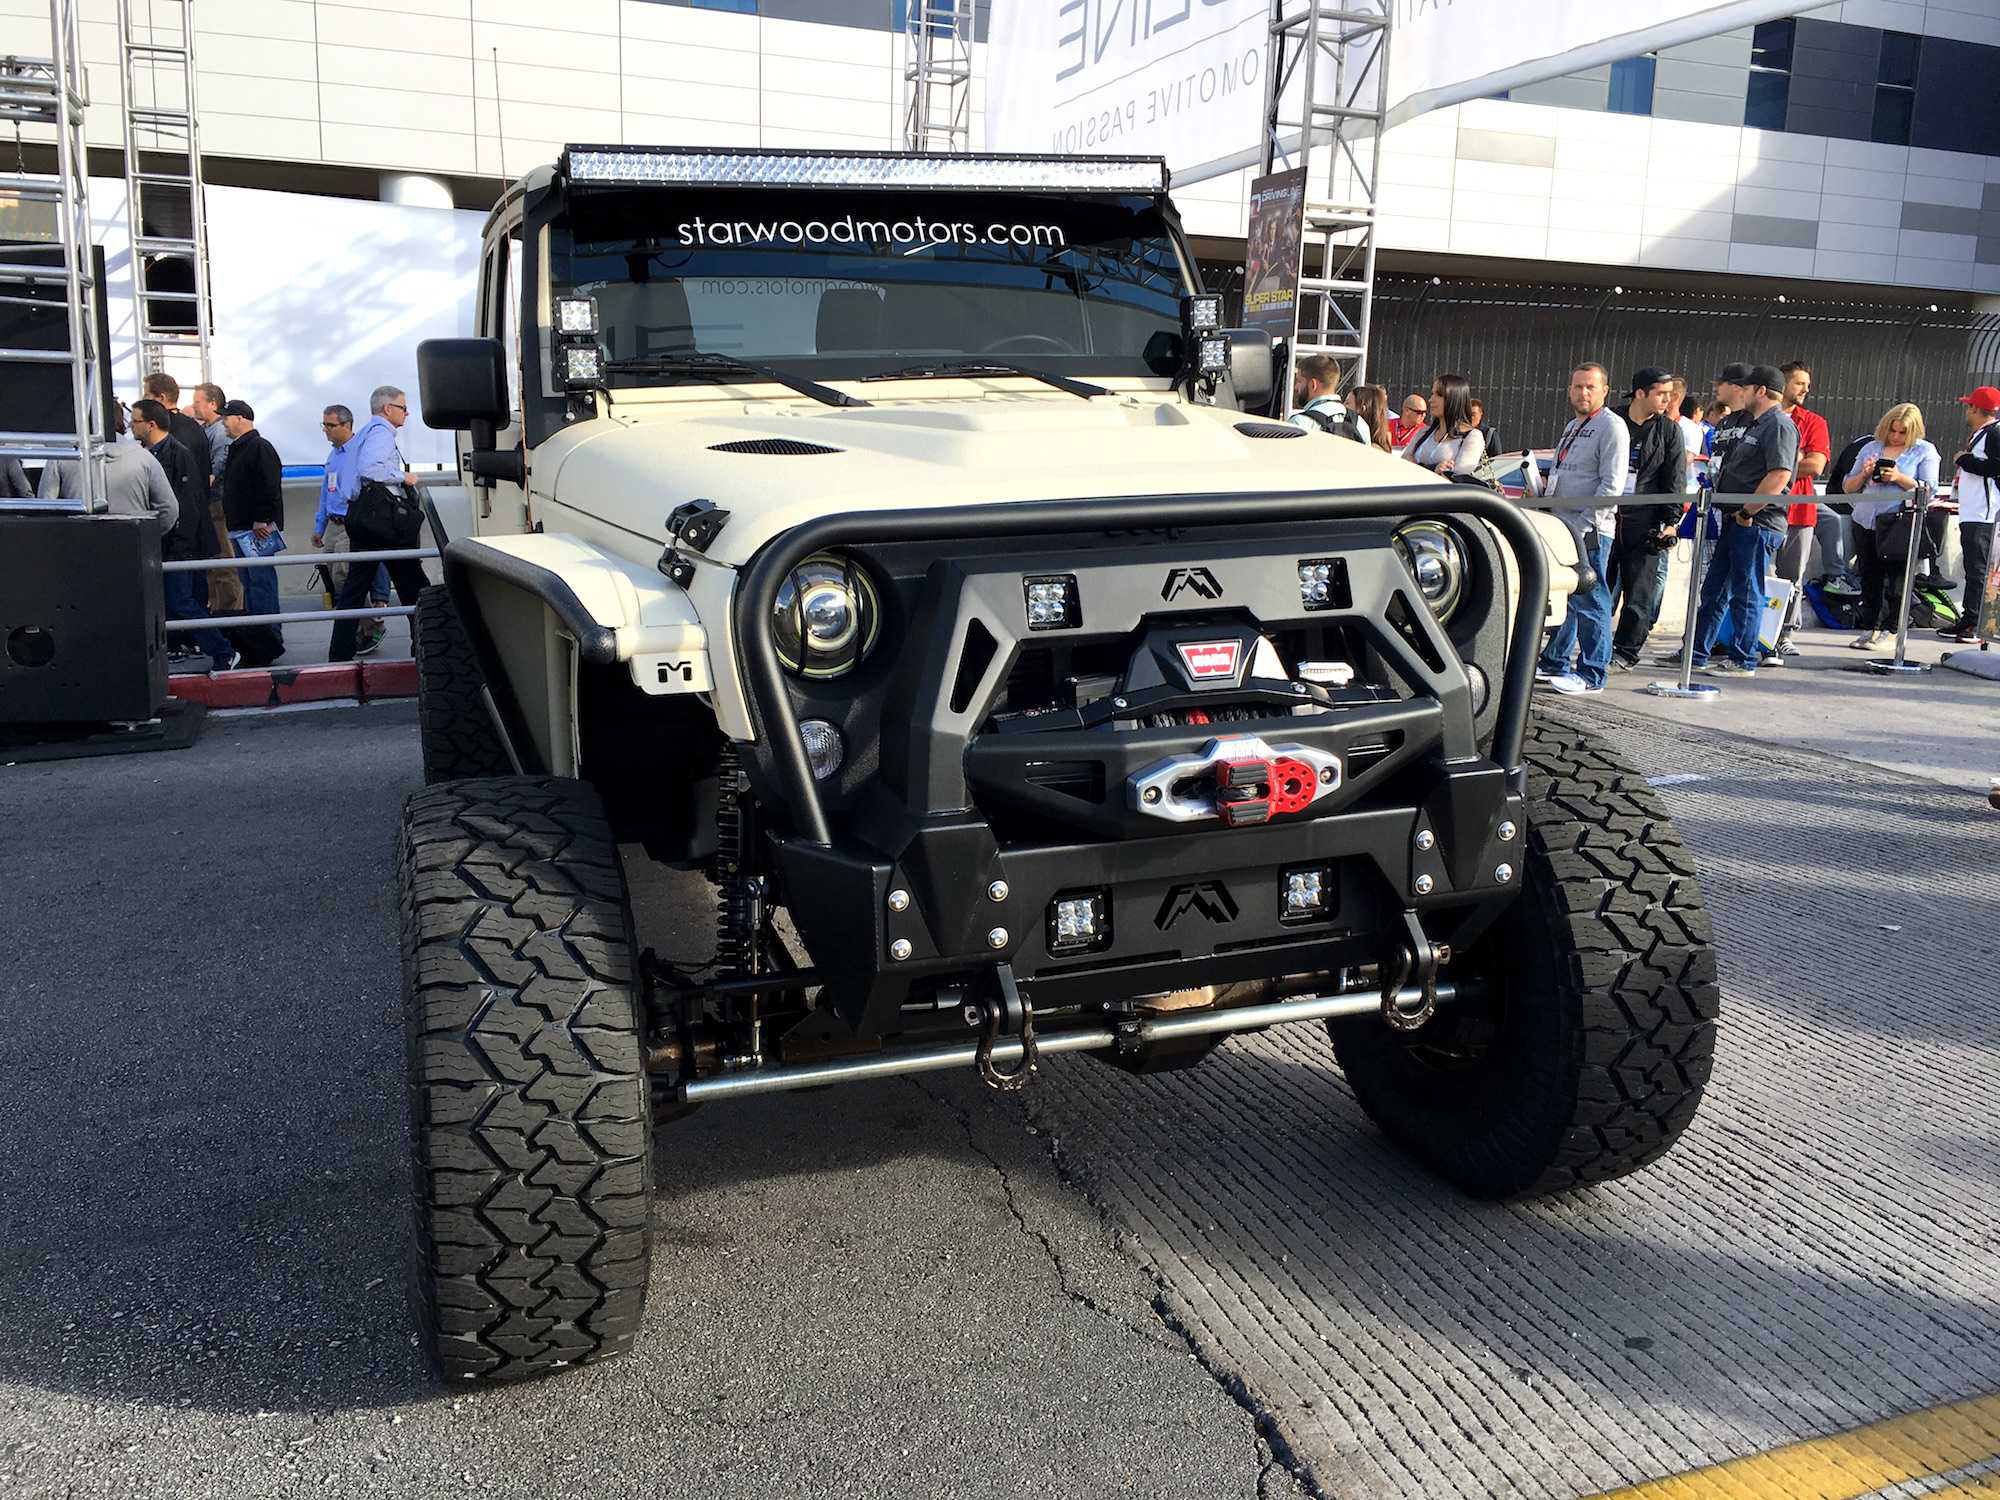 The Bandit is the 700-HP, Hemi-powered Jeep pickup of our dreams (PHOTOS) |  Equipment World